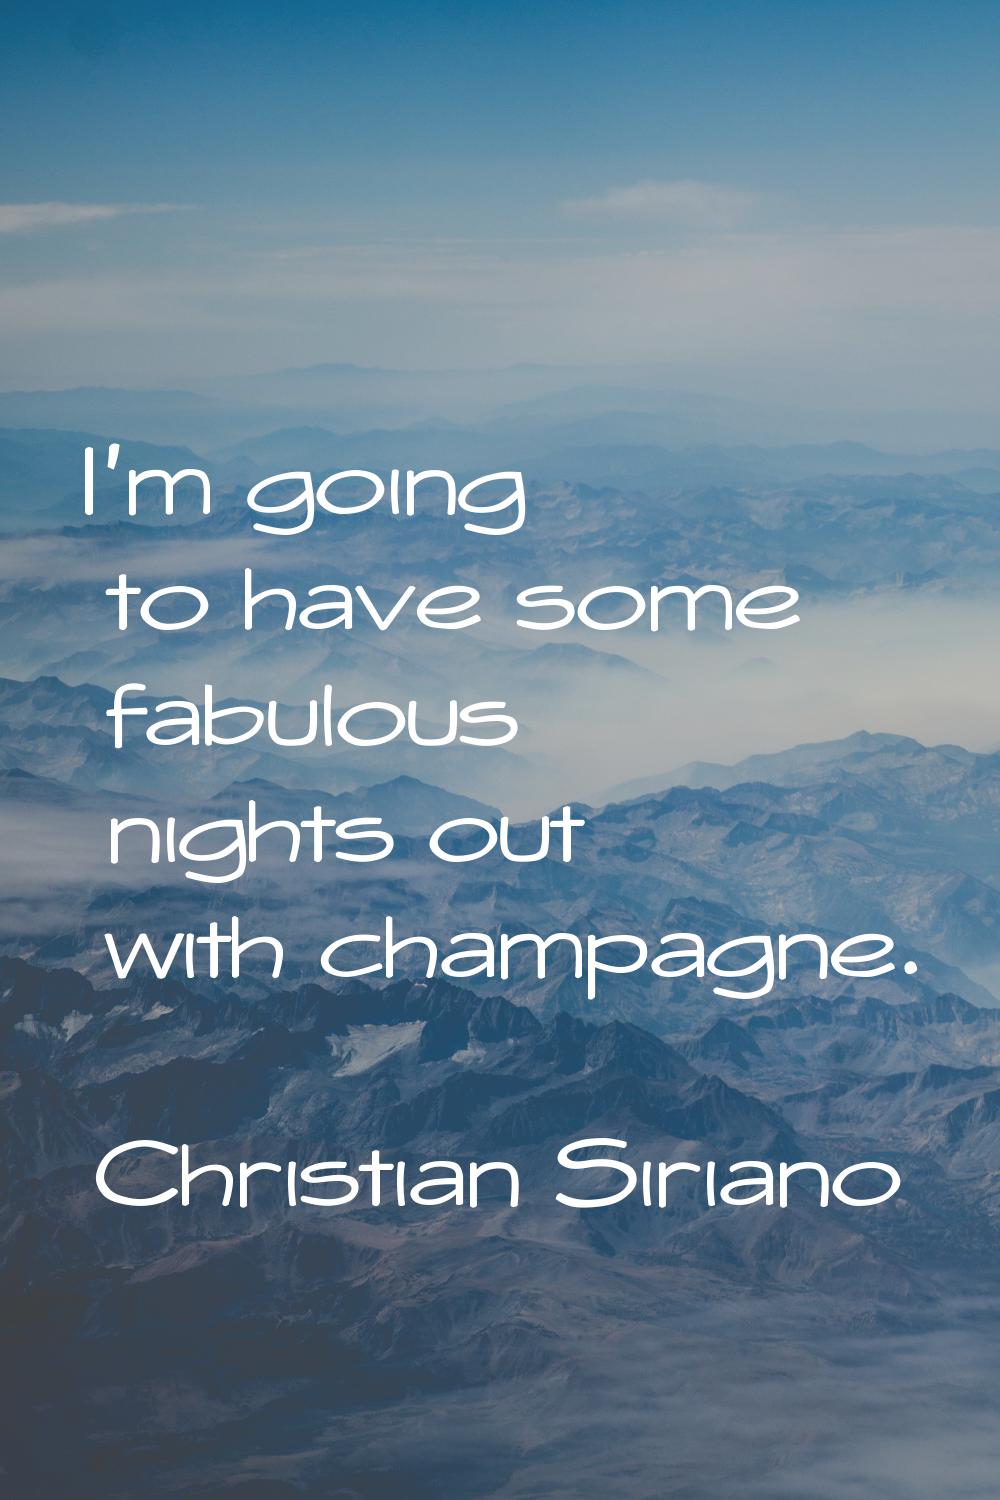 I'm going to have some fabulous nights out with champagne.